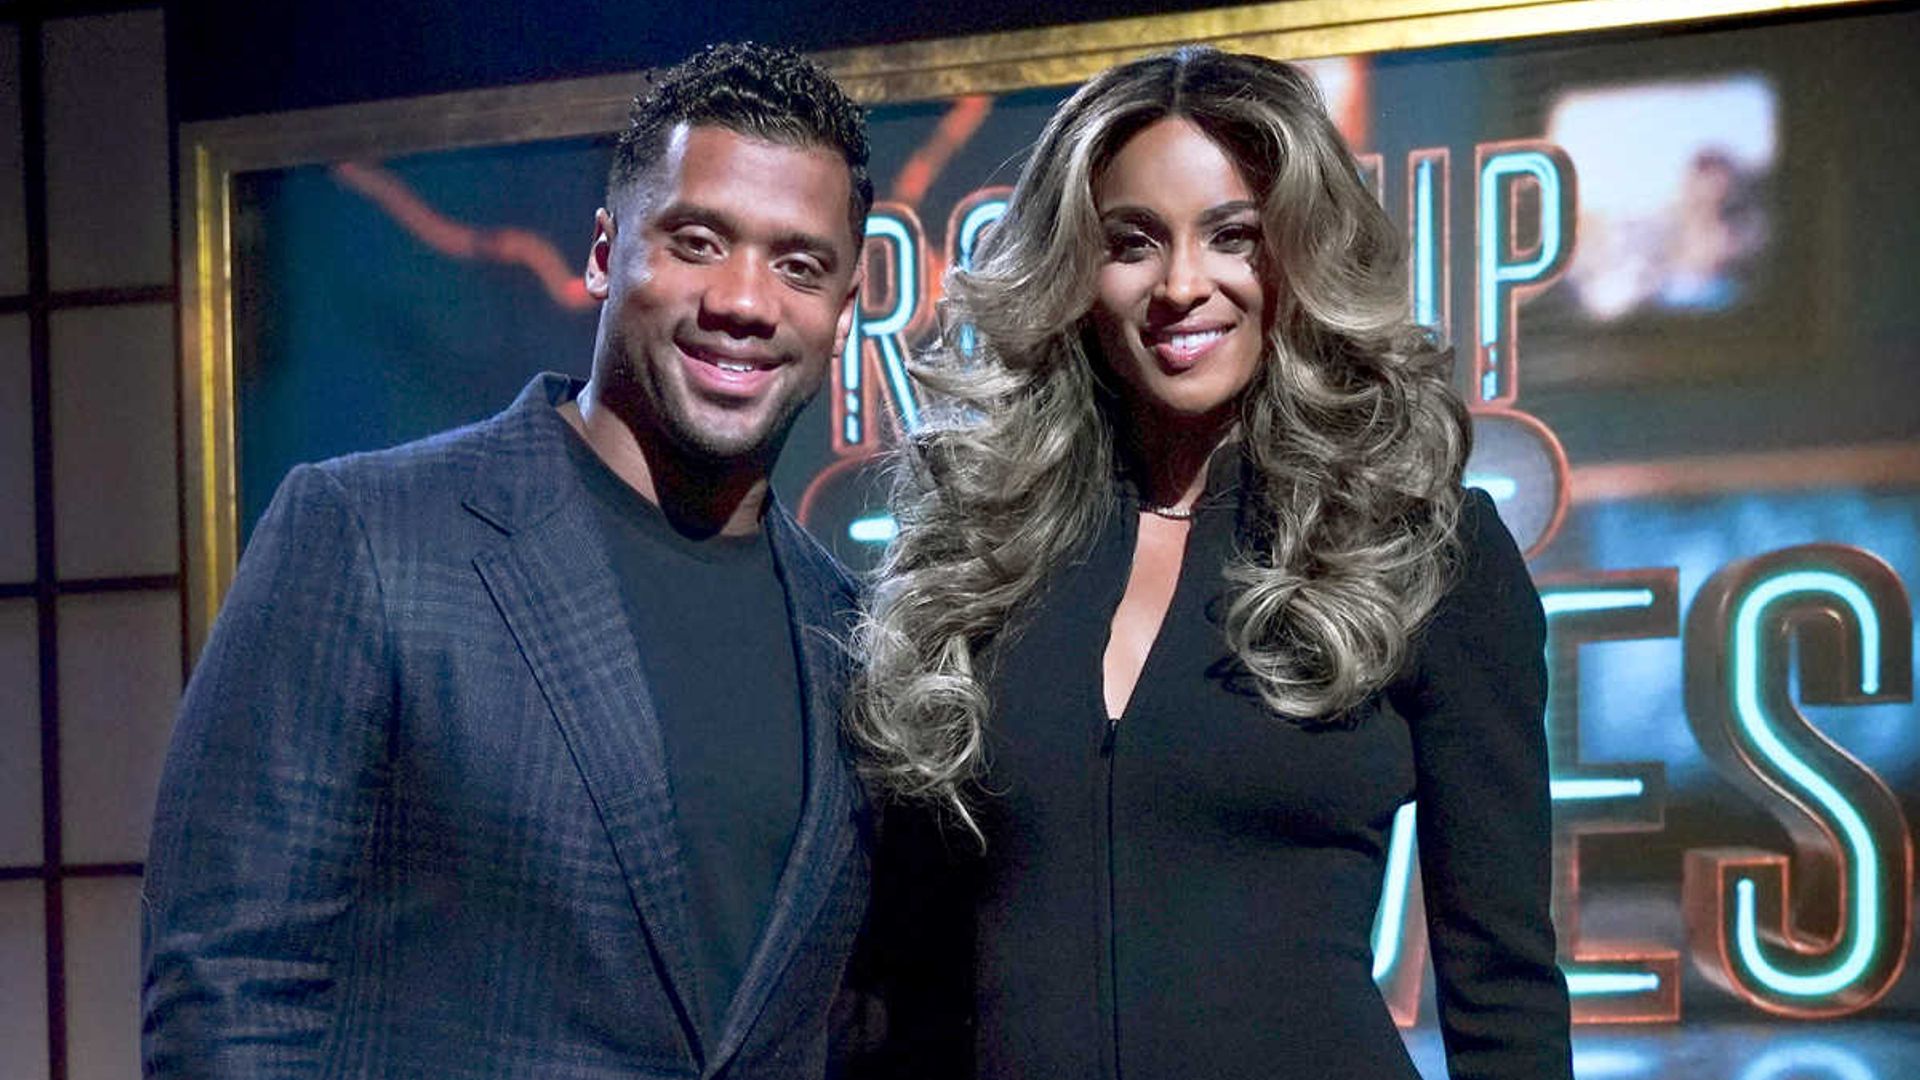 Ciara and Russell Wilson's family Christmas had some surprising guests you have to see